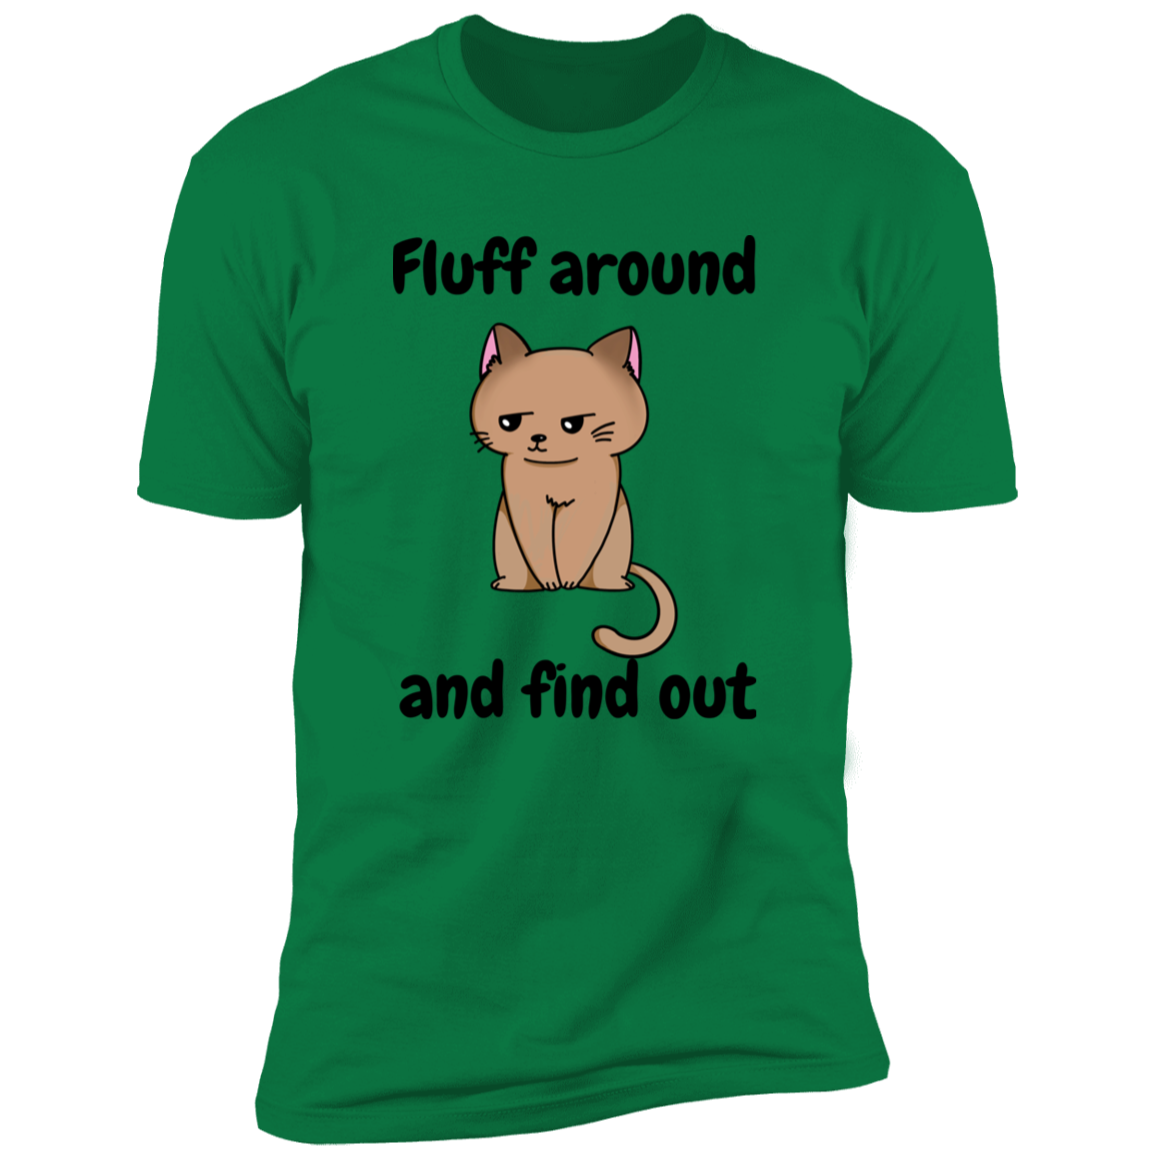 Fluff Around and Find Out Cat Shirt, funny cat shirt, funny cat shirt for humans, in kelly green